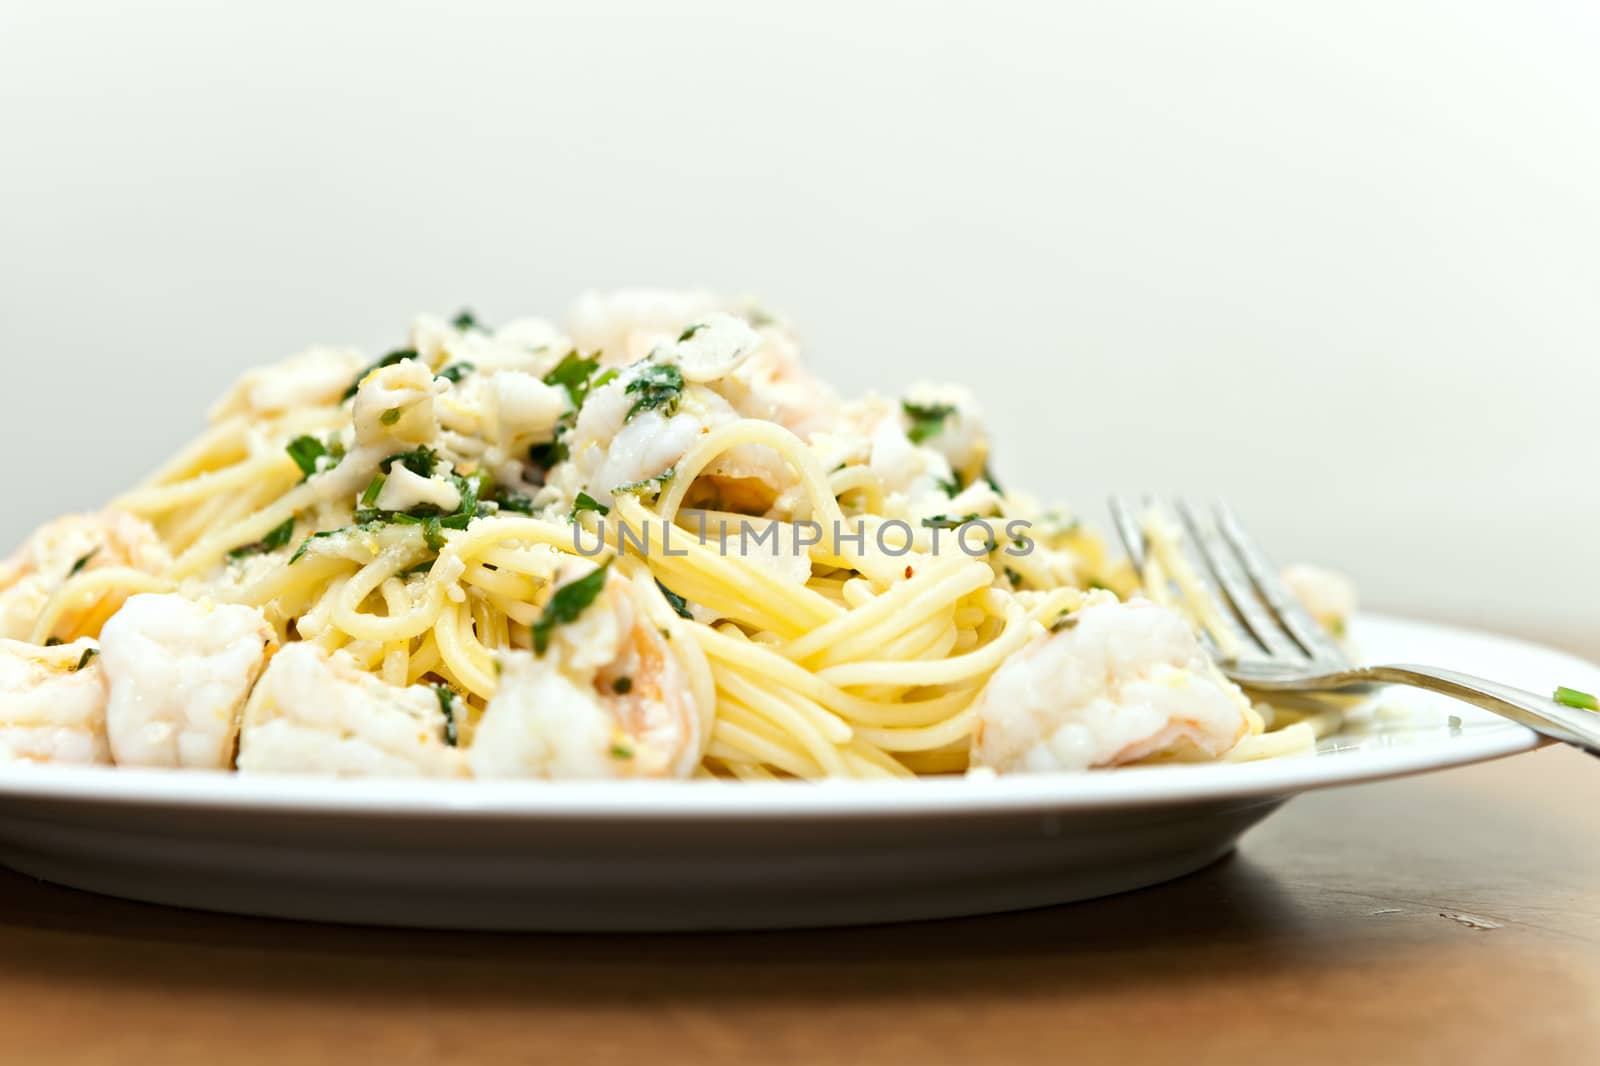 A delicious shrimp scampi pasta dish with calamari parsley garlic and olive oil. Shallow depth of field.